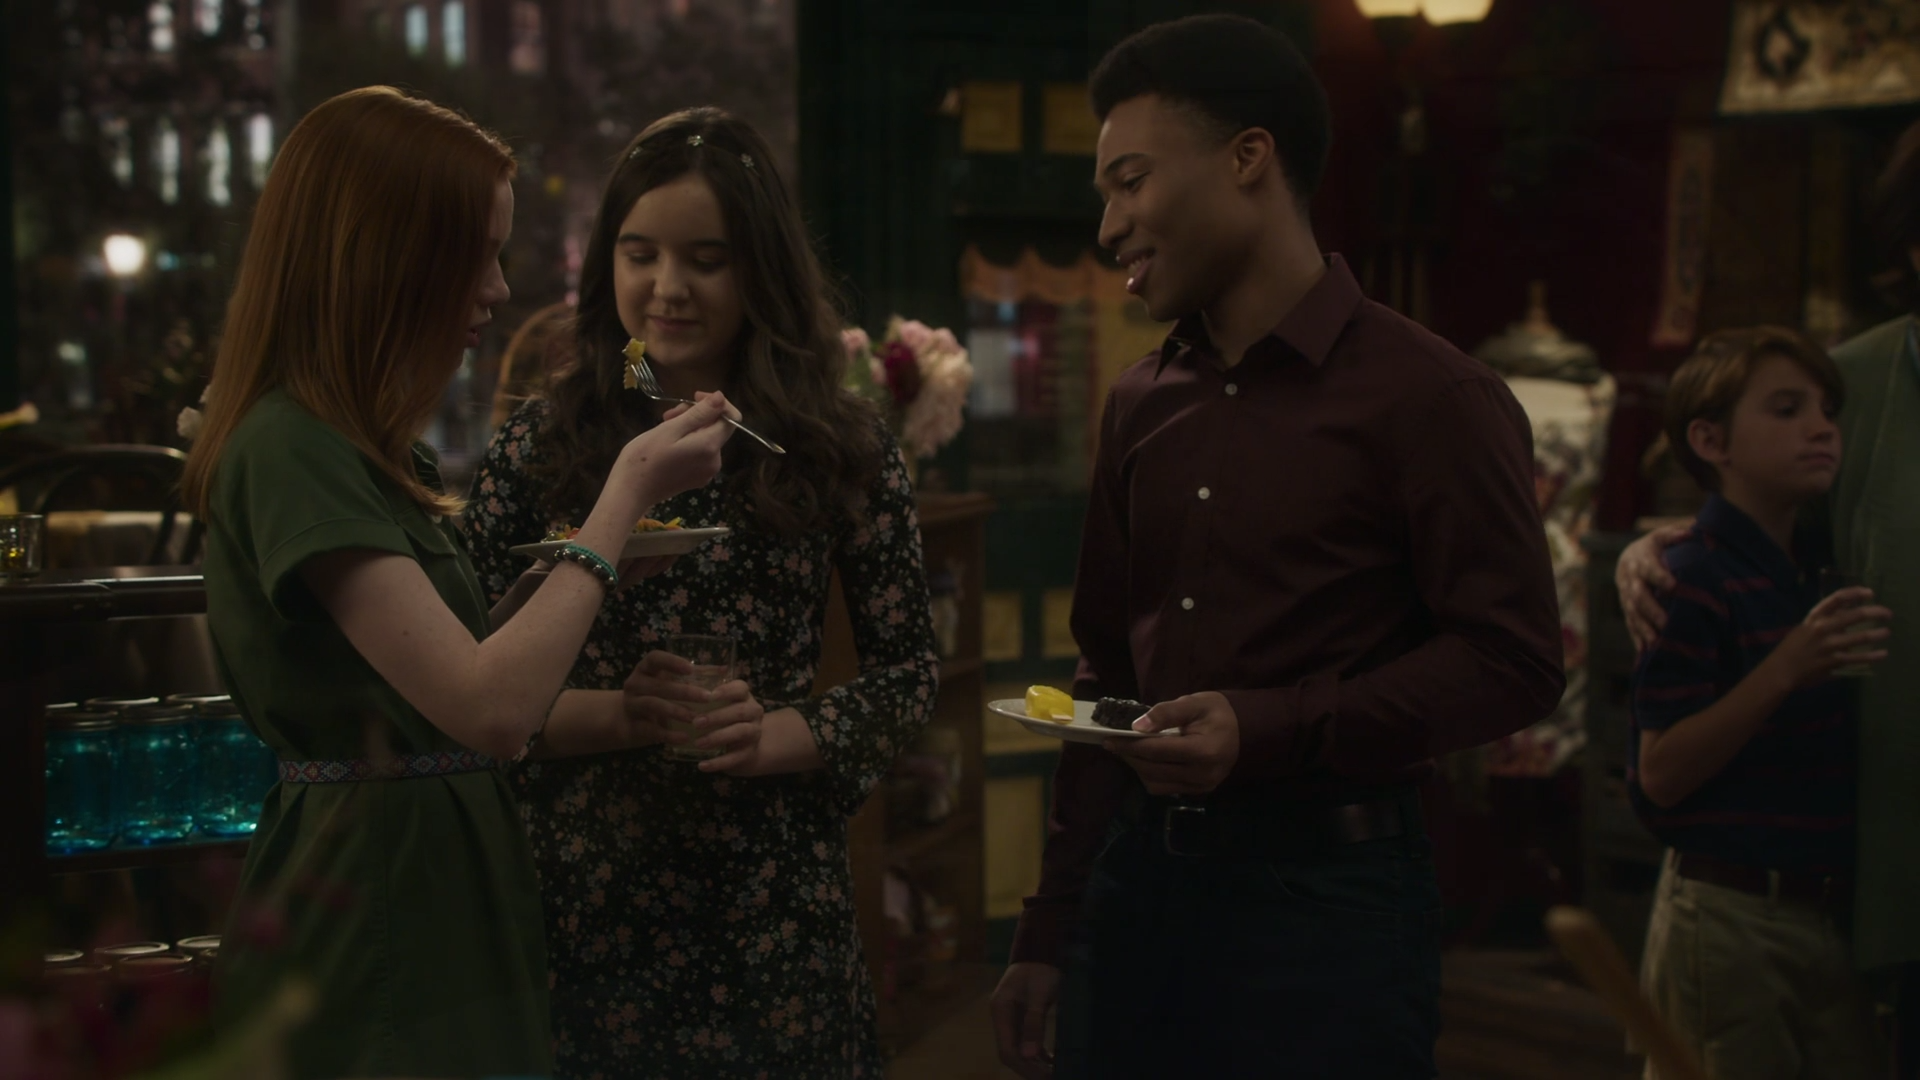 https://static.wikia.nocookie.net/justaddmagic/images/b/b4/Justaddgoodbye.png/revision/latest?cb=20190202212138